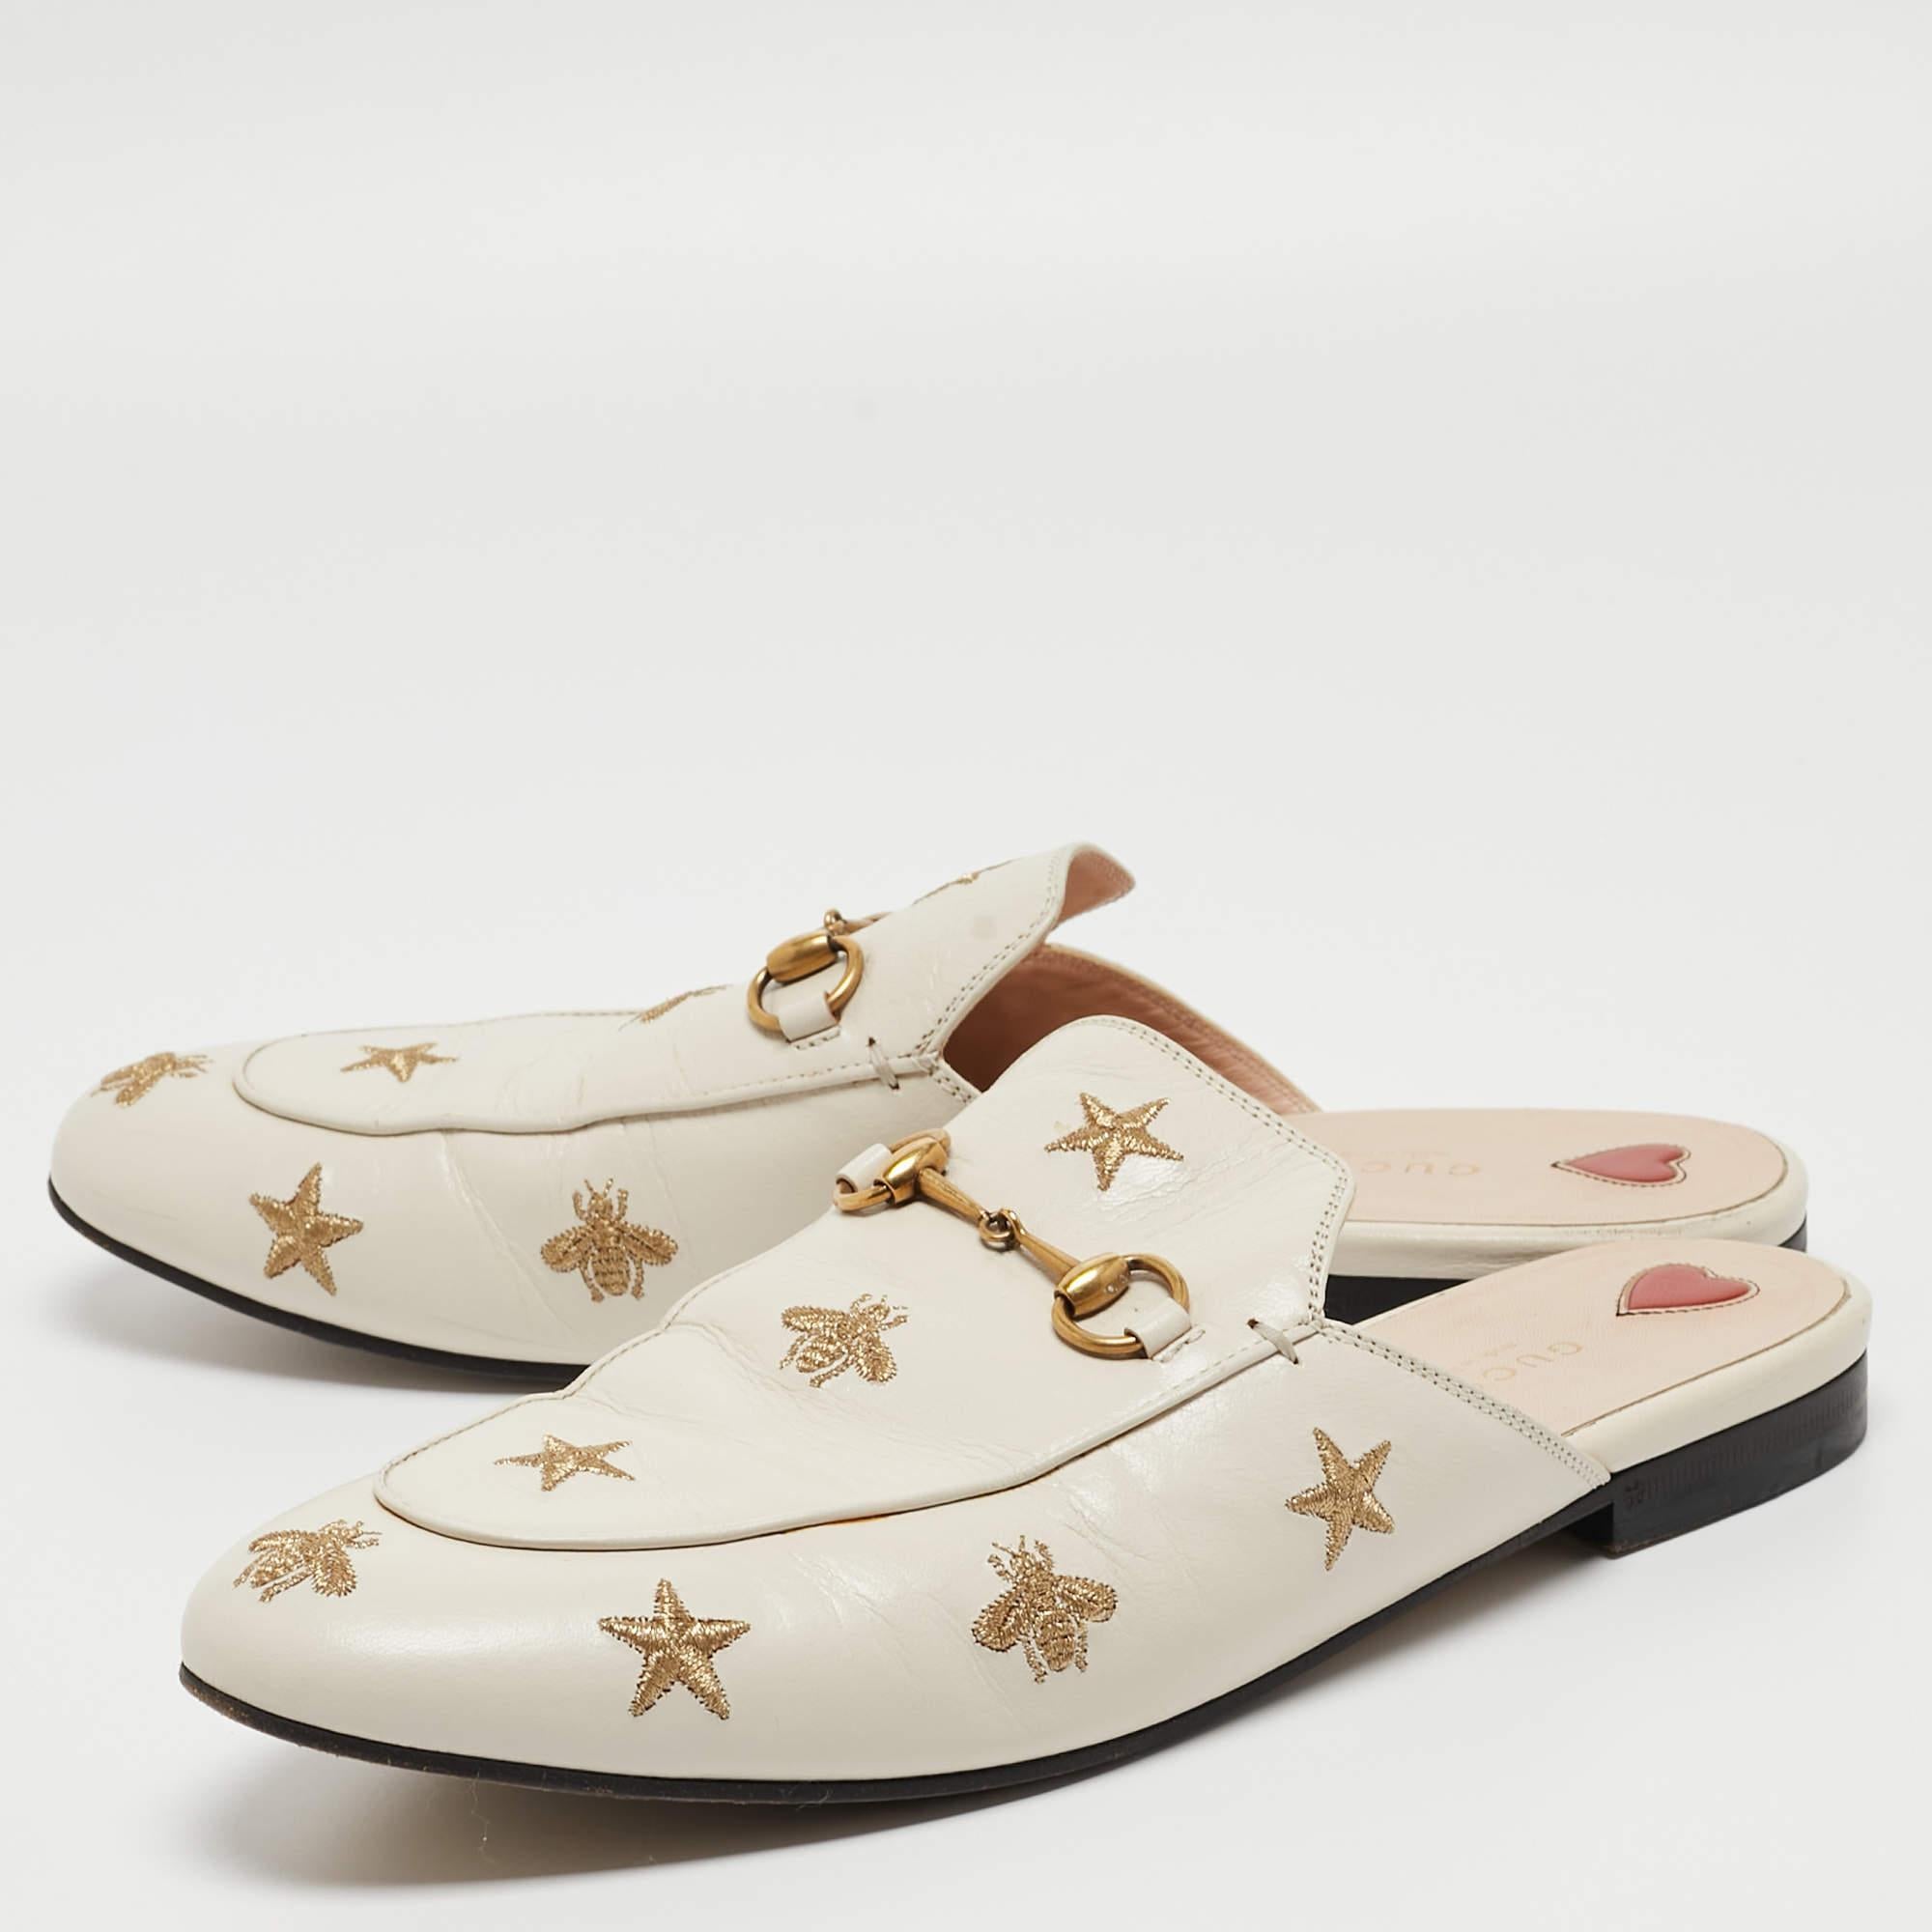 Indulge in luxurious sophistication with the Gucci Princetown Flat Mules. Crafted from sumptuous cream leather, these exquisite mules feature intricate bee and star embroidery, elevating any ensemble with unparalleled elegance and charm.

